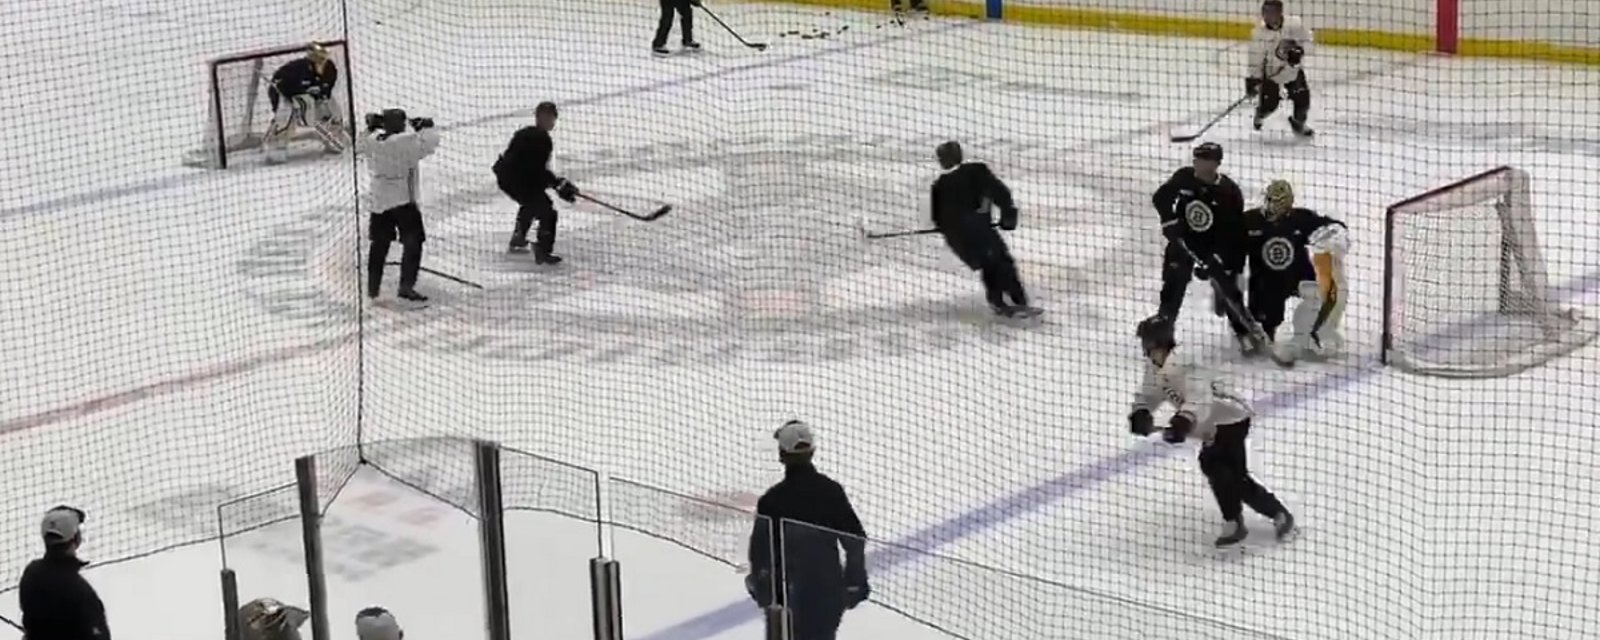 Chris Wagner flexes on Brad Marchand after failed hit in practice.